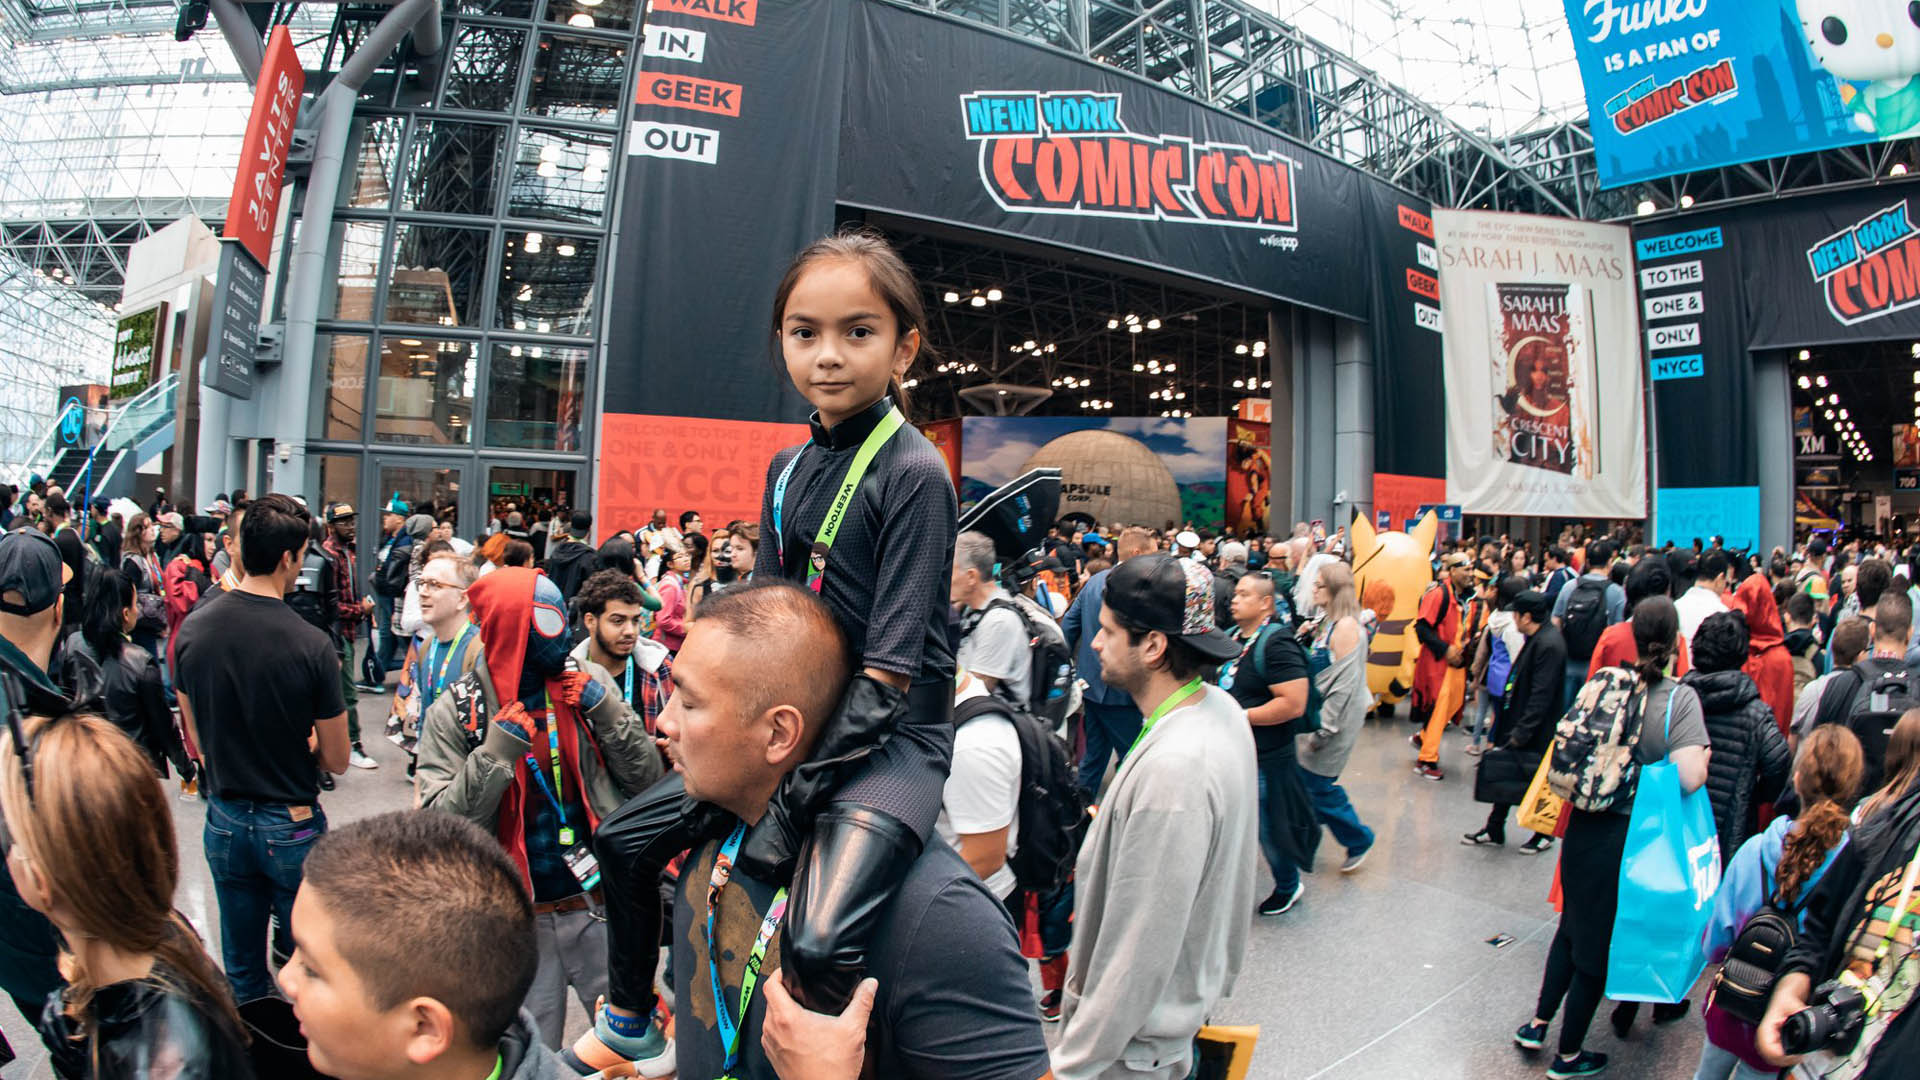 New York Comic Con sells out in 12 hours inside the return of